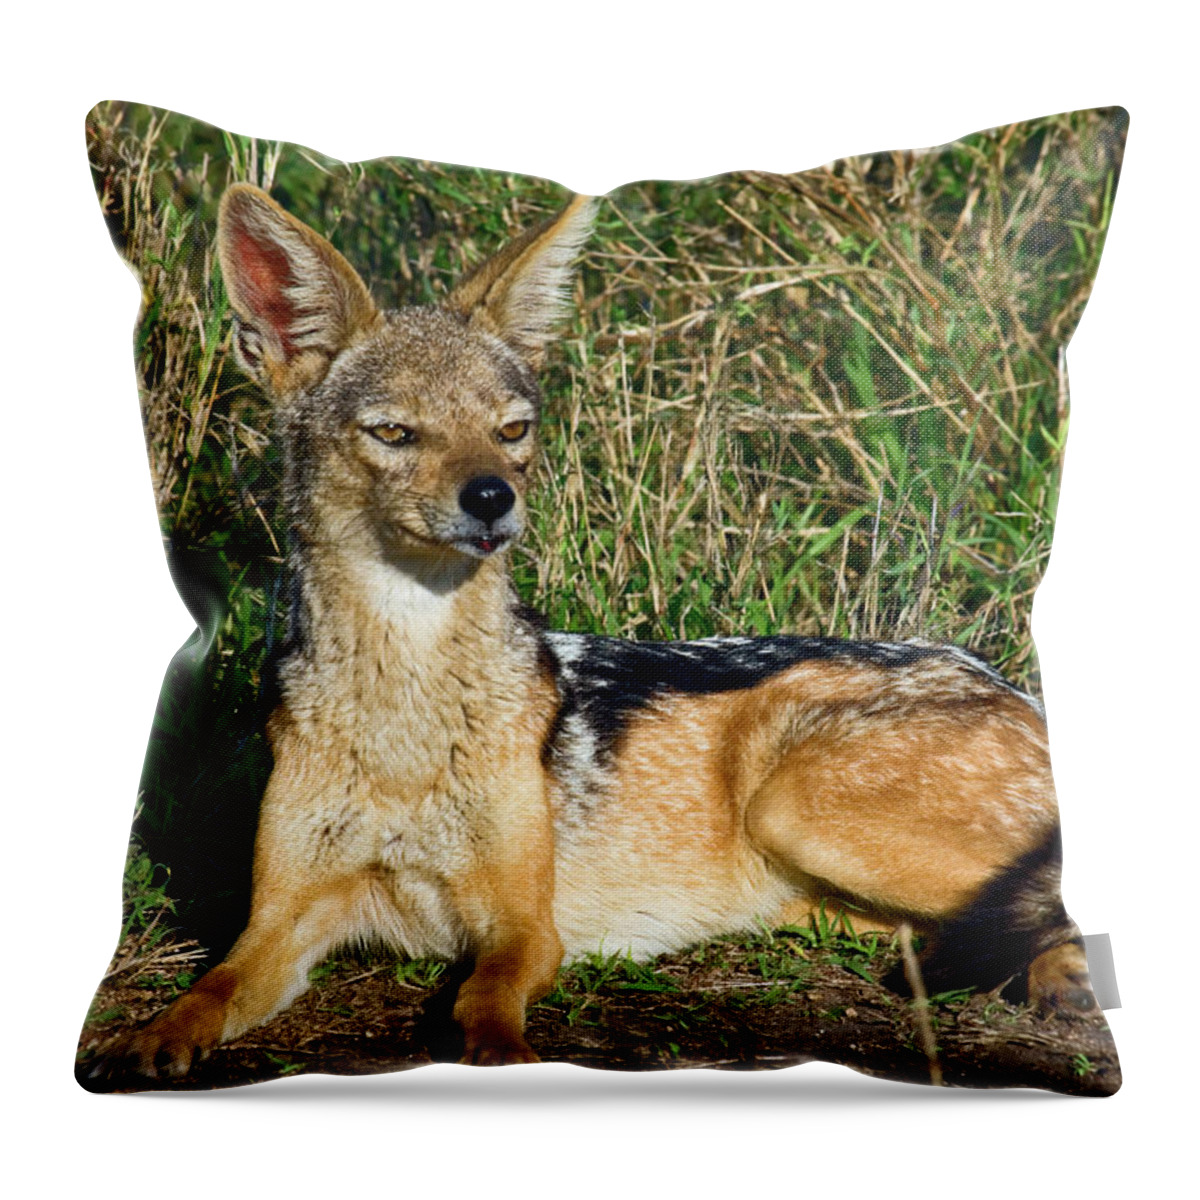 Black-backed Jackal Throw Pillow featuring the photograph Black-backed Jackal by Sally Weigand